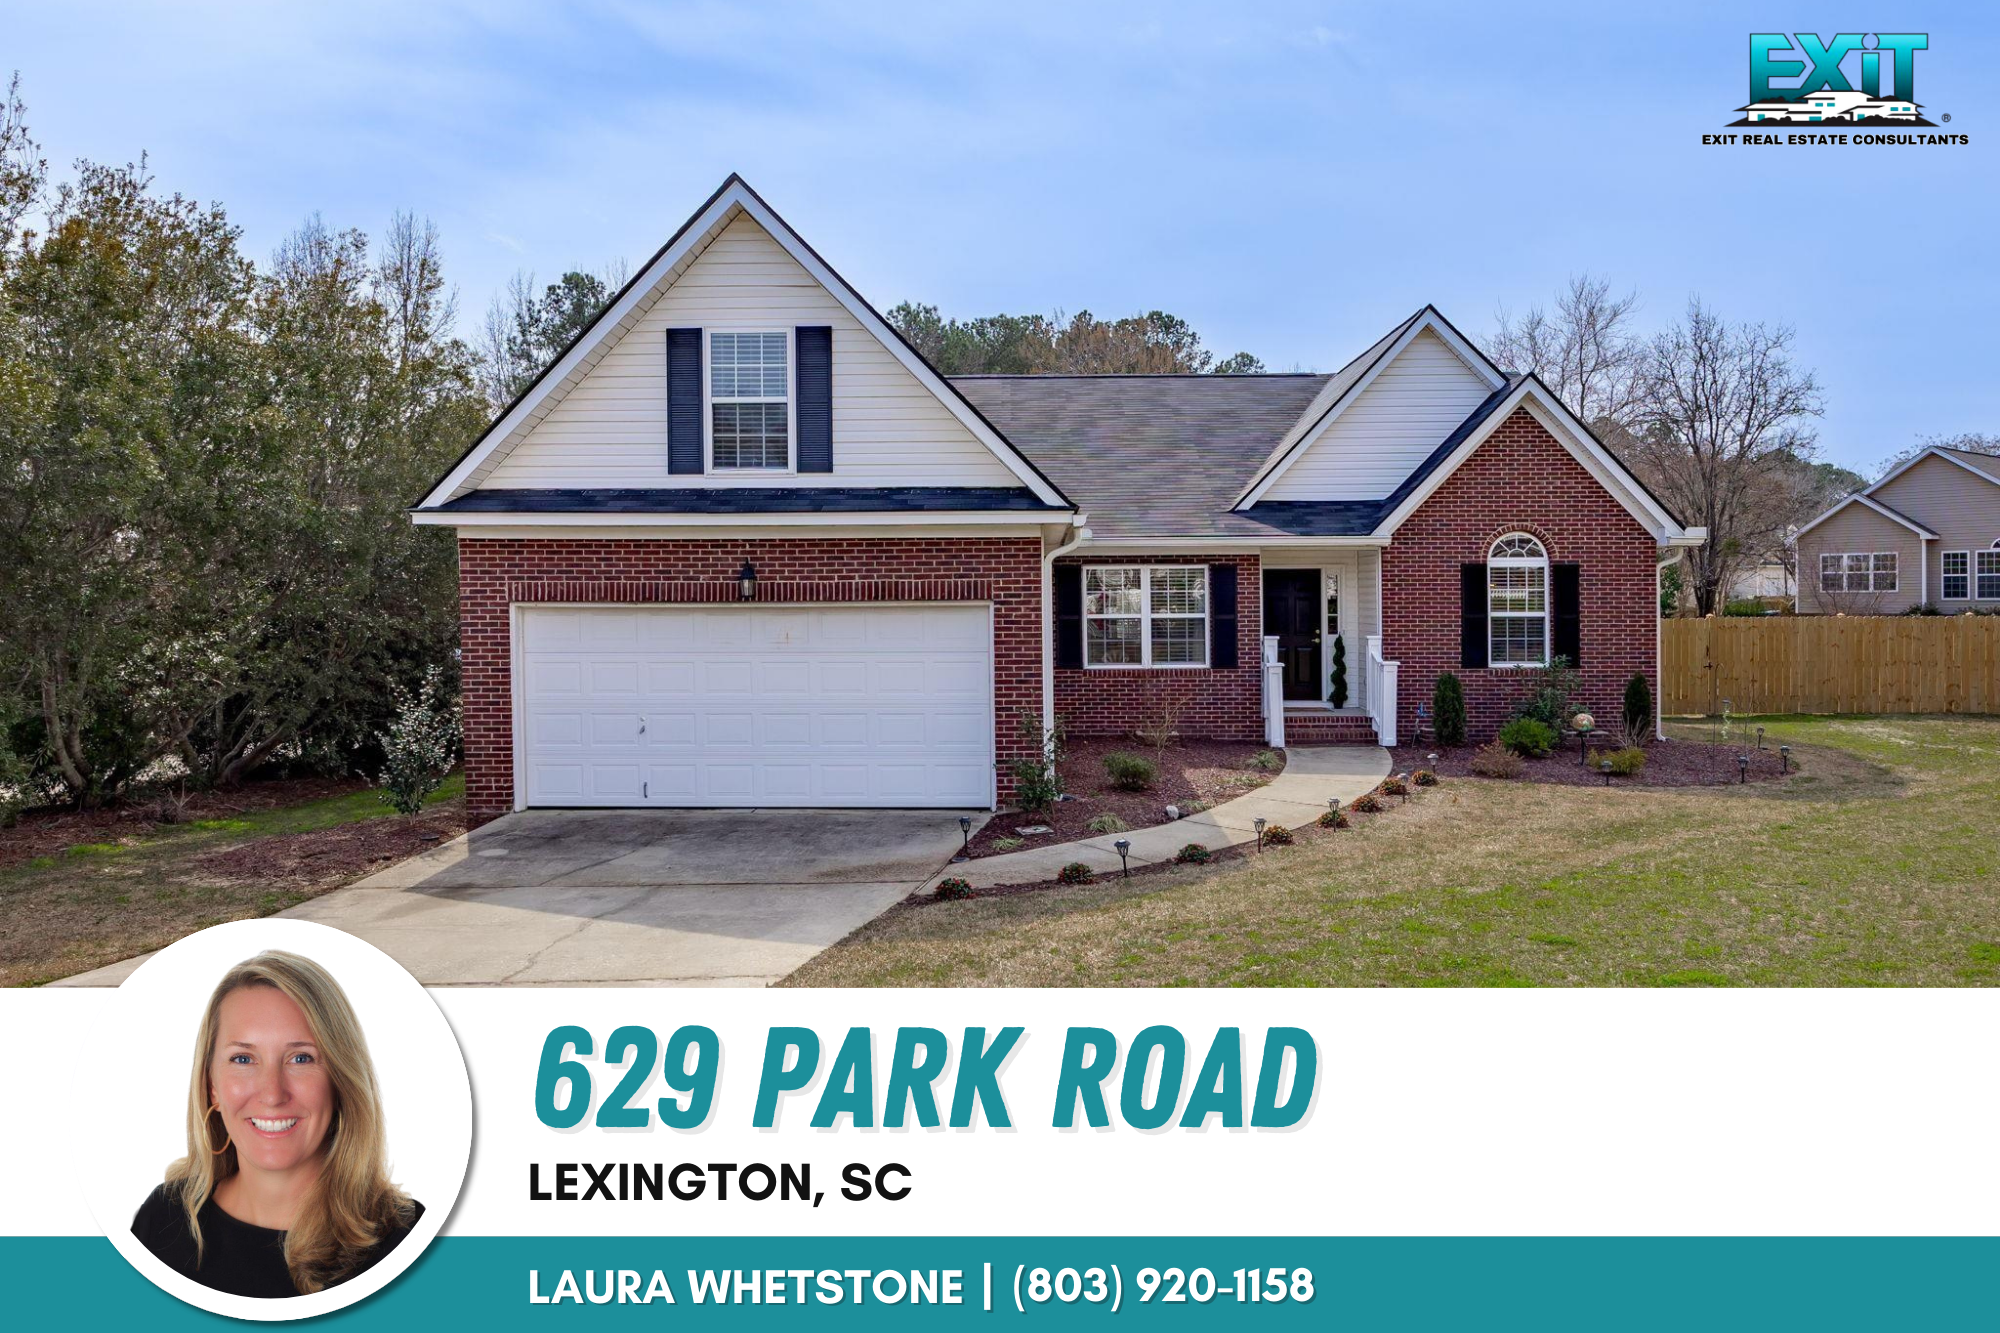 Just listed in Parkside - Lexington